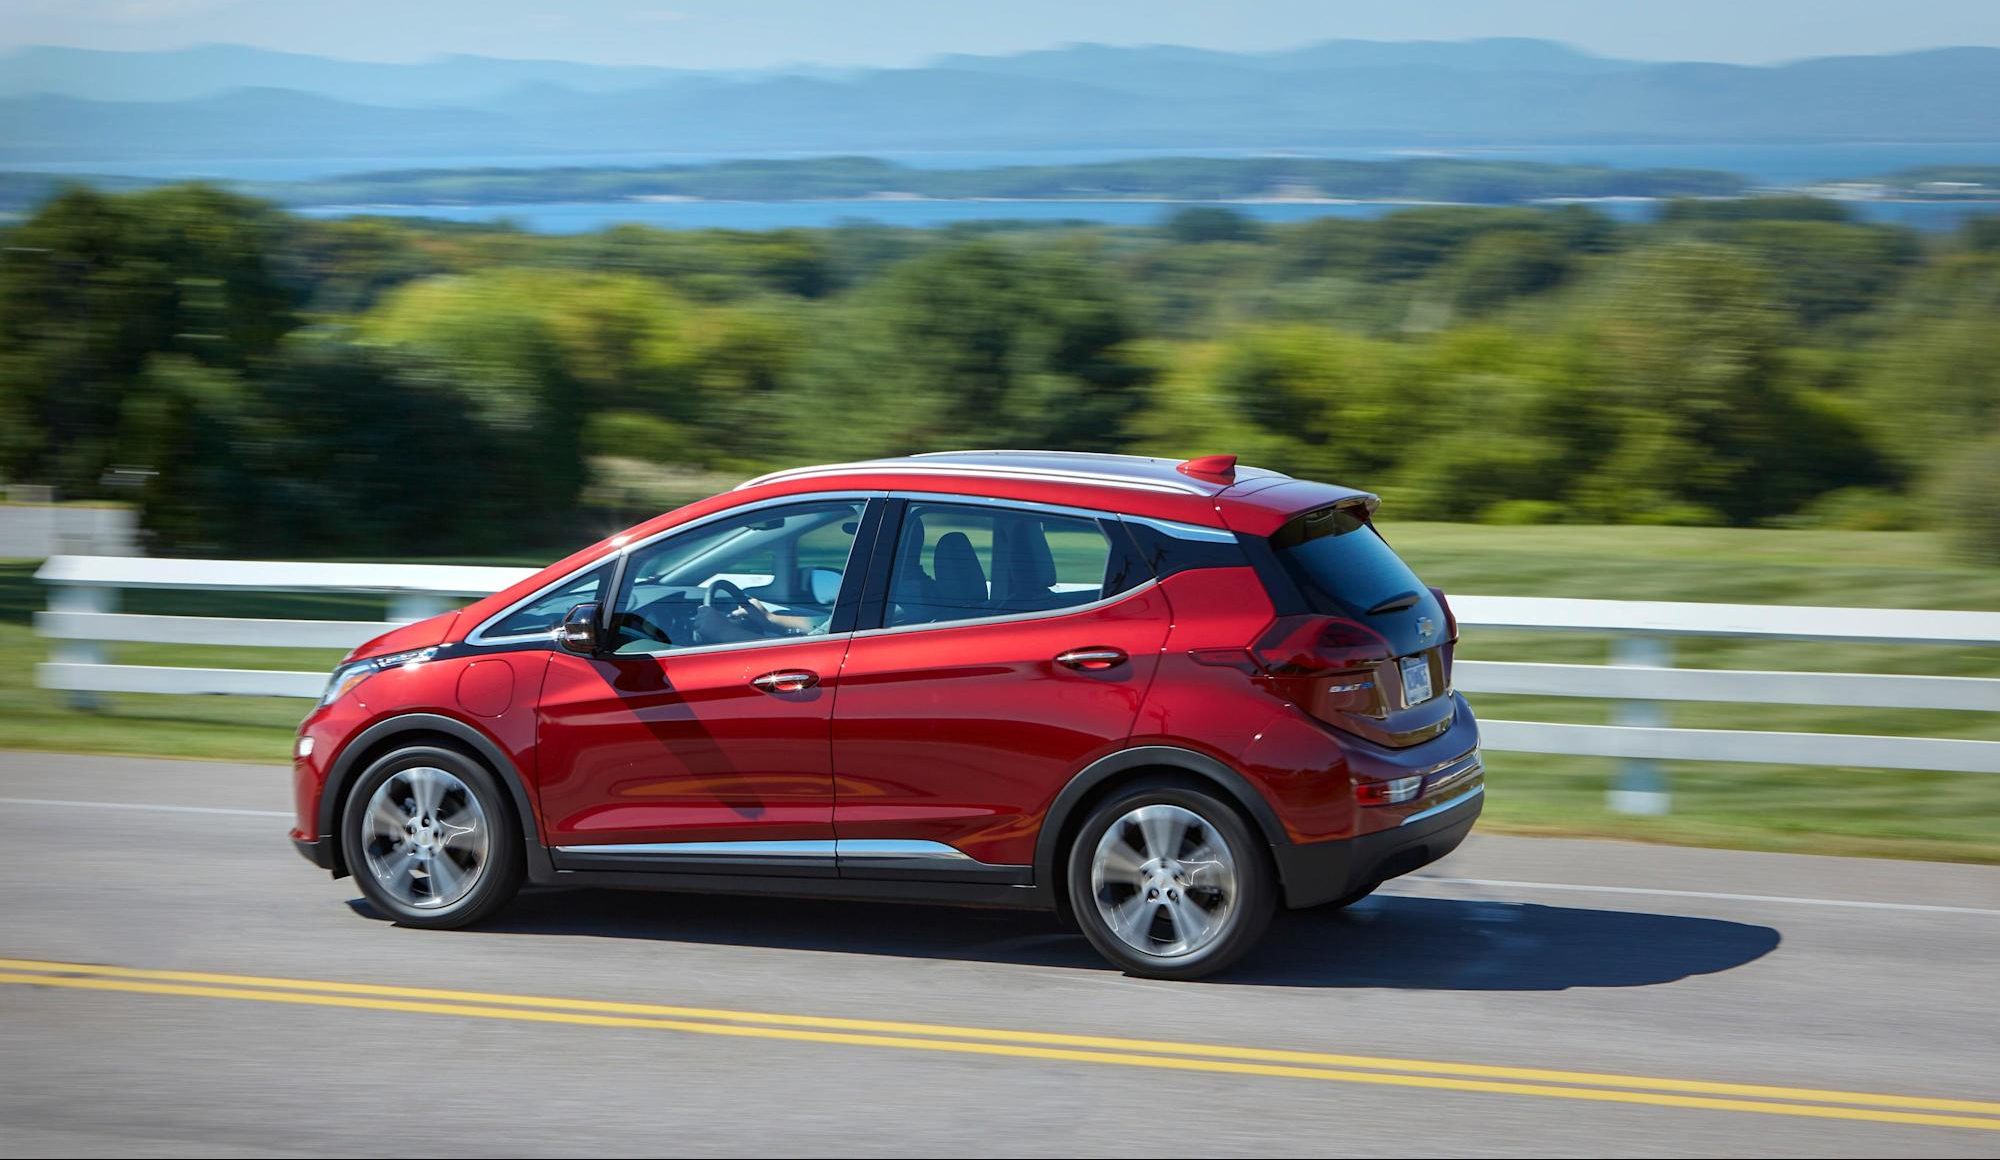 GM issues safety warning for recalled Bolt EV units over potential fire risk